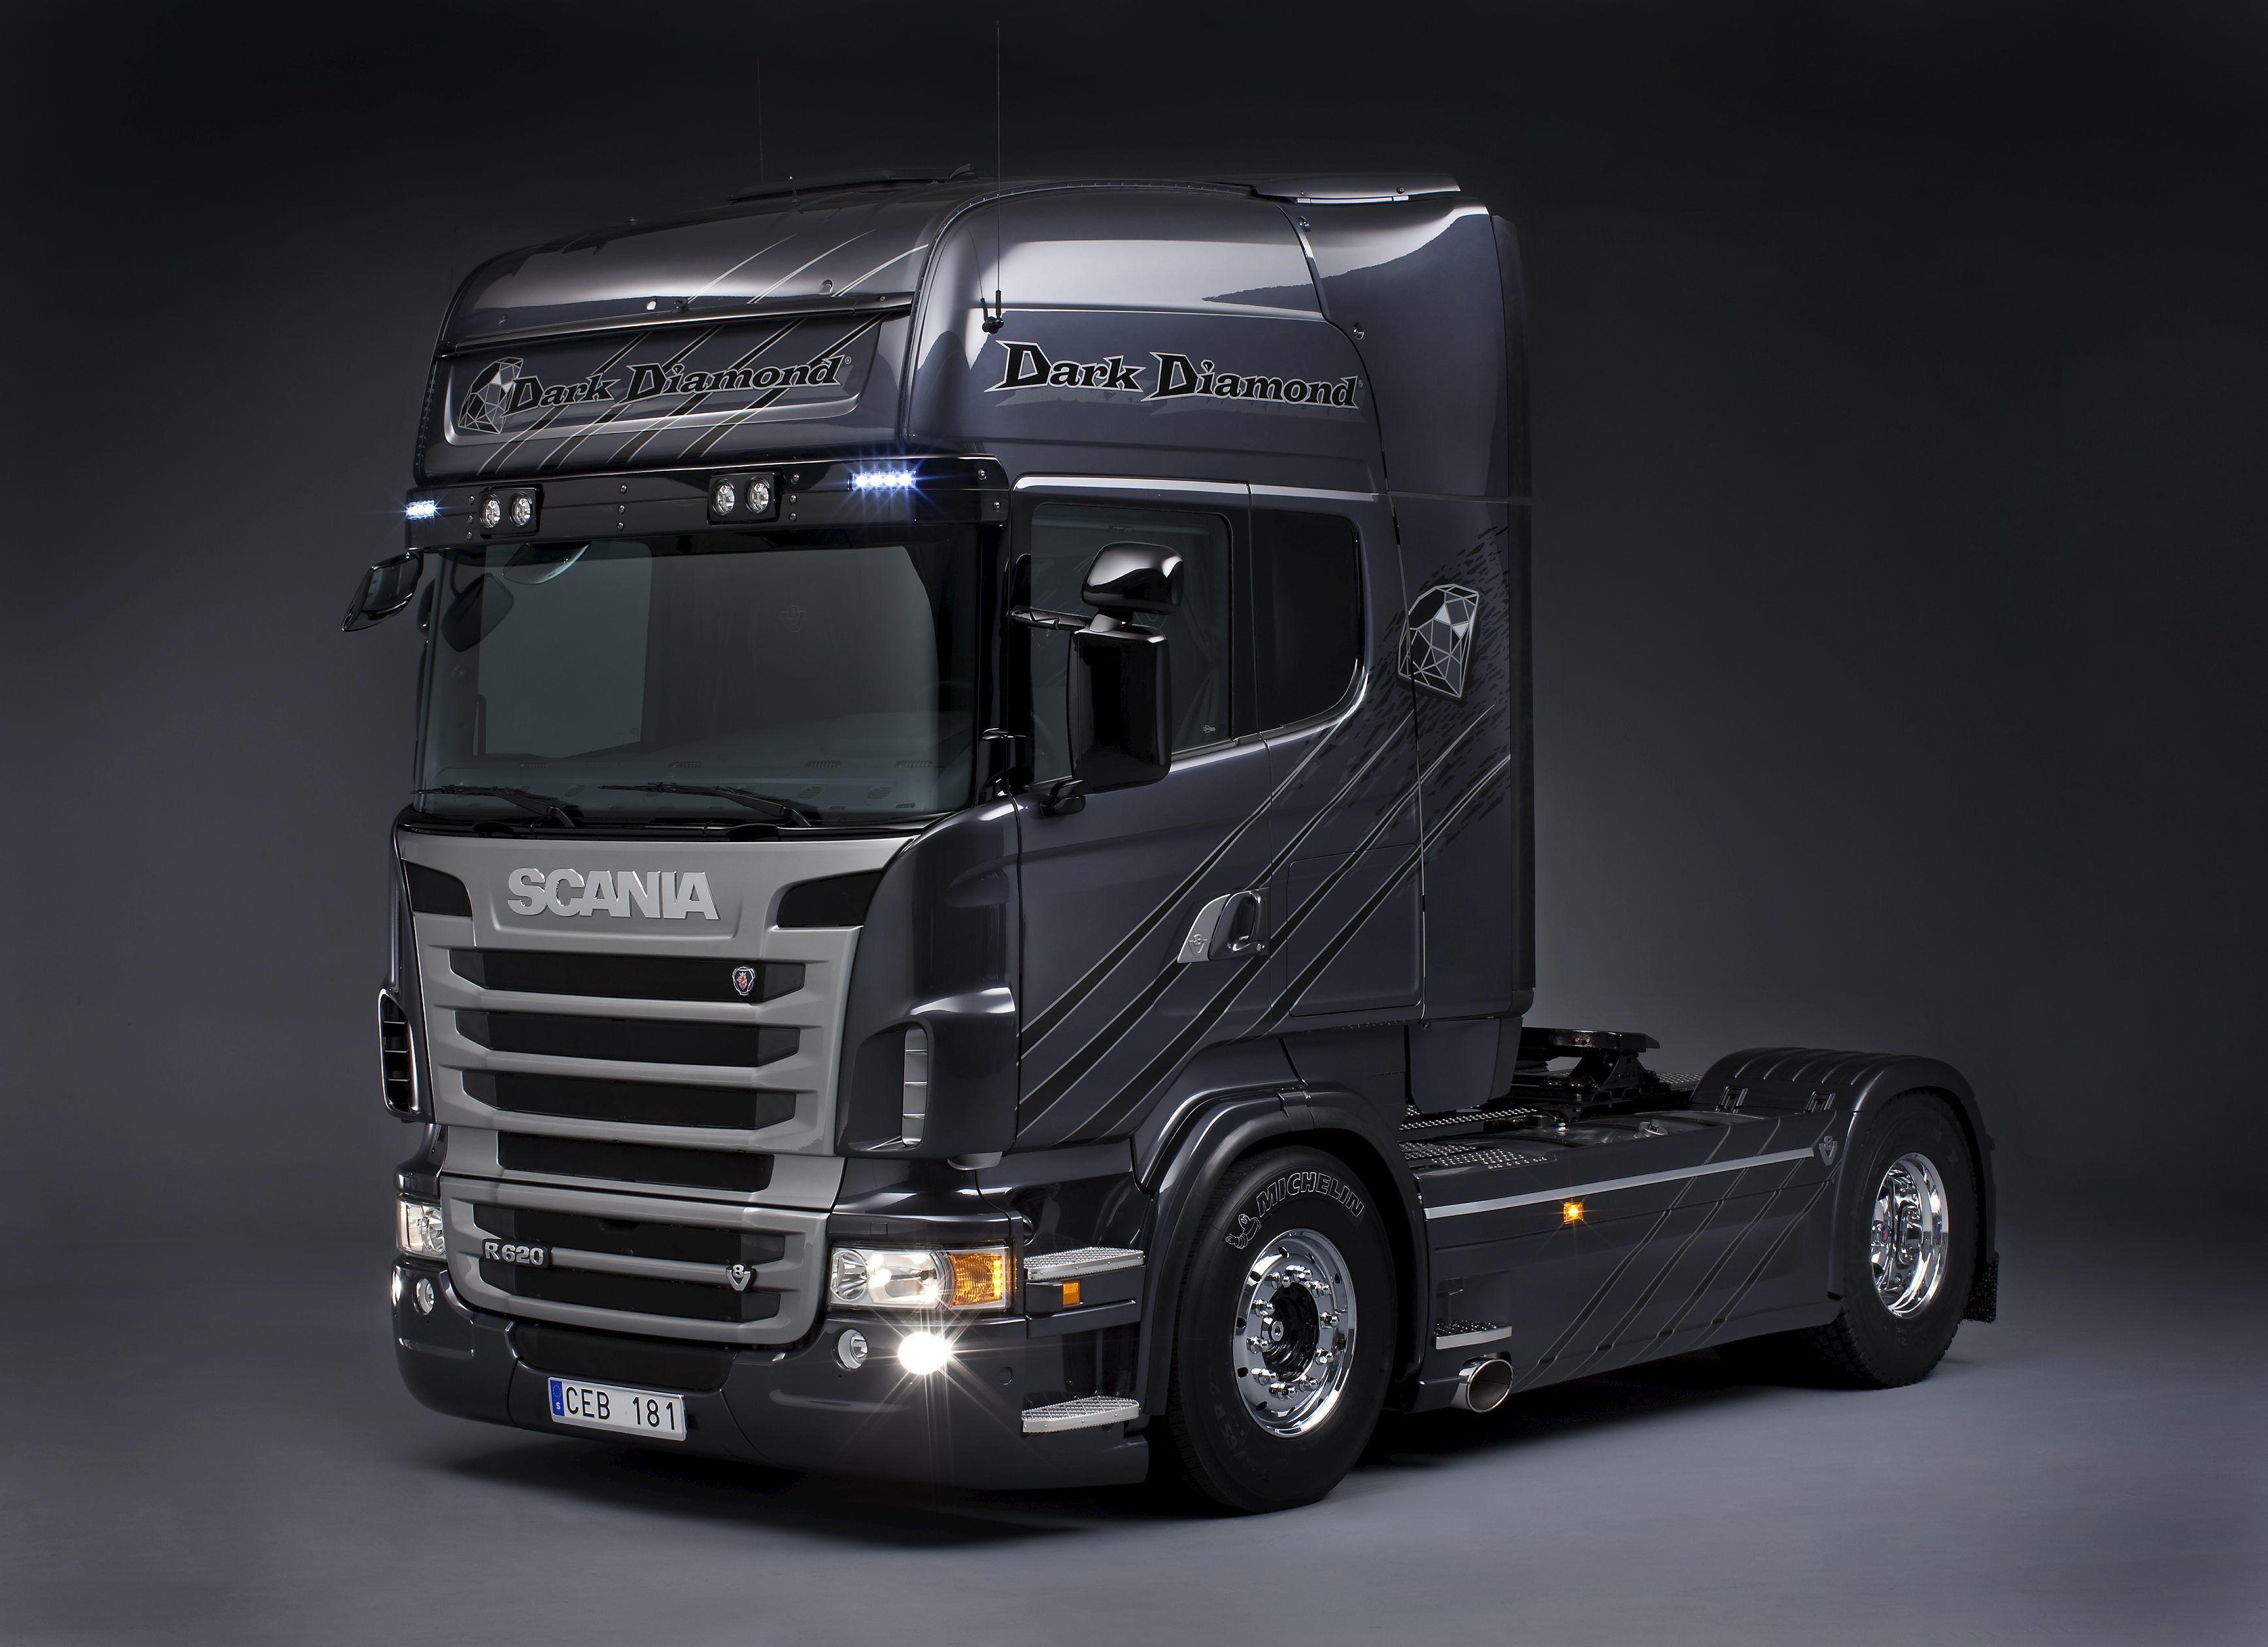 Scania Truck Wallpaper. Iwan Collection&;s